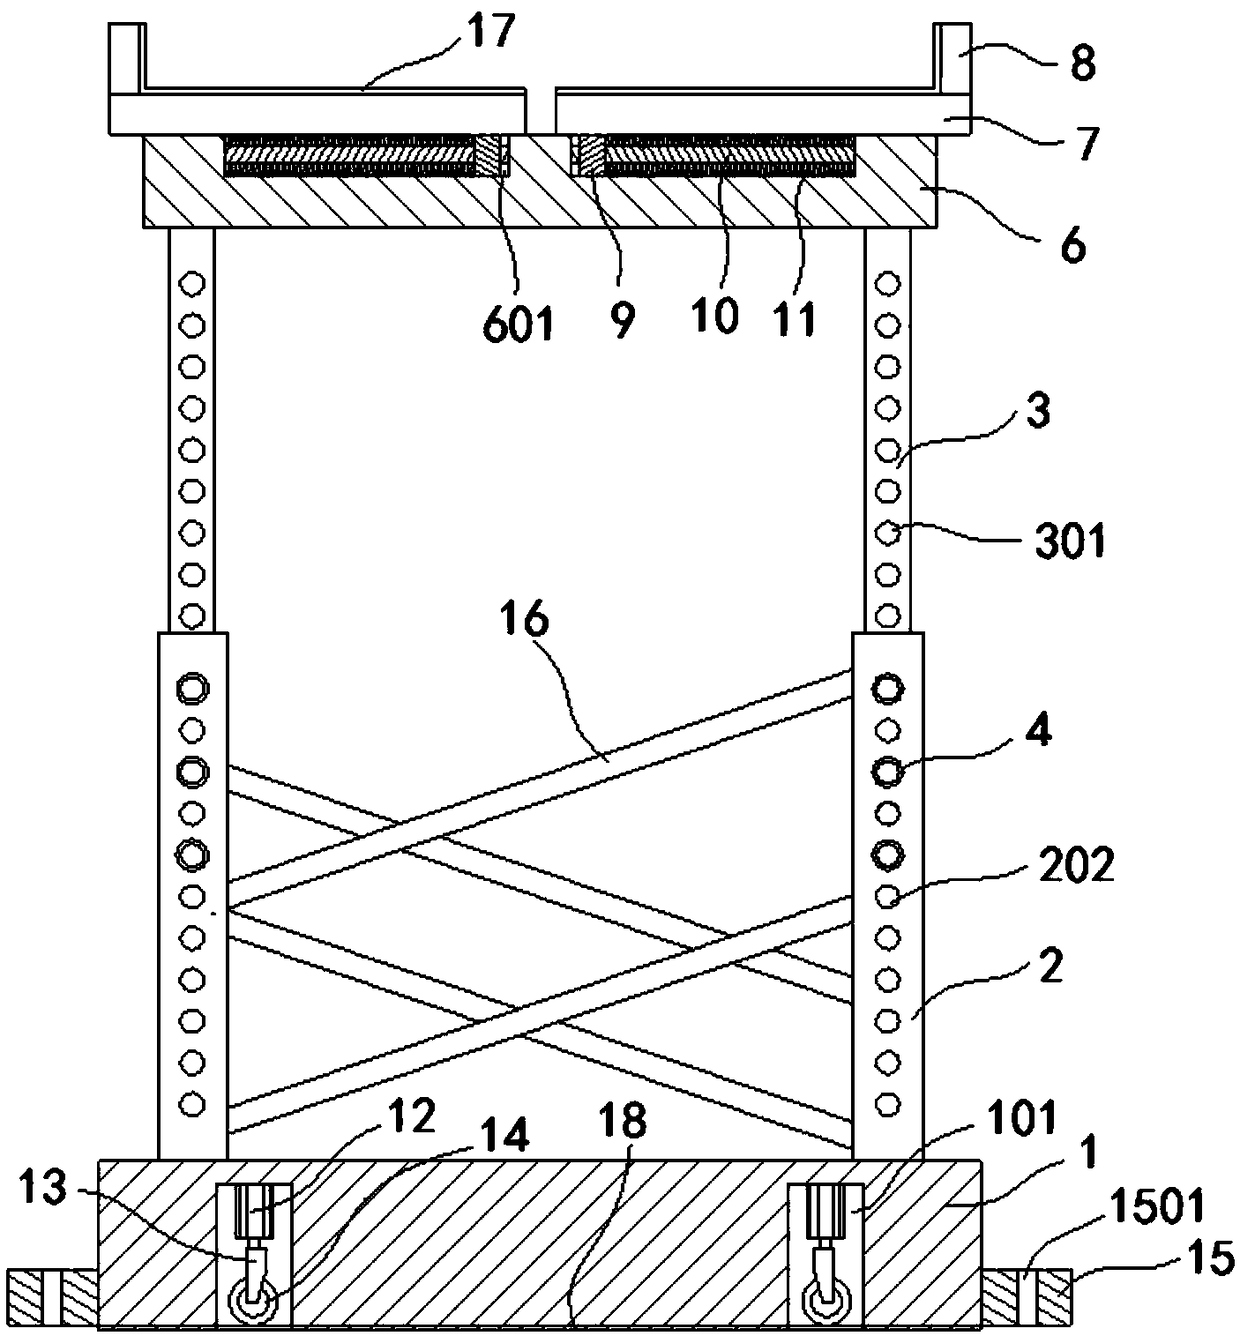 Supporting frame for fabricated building